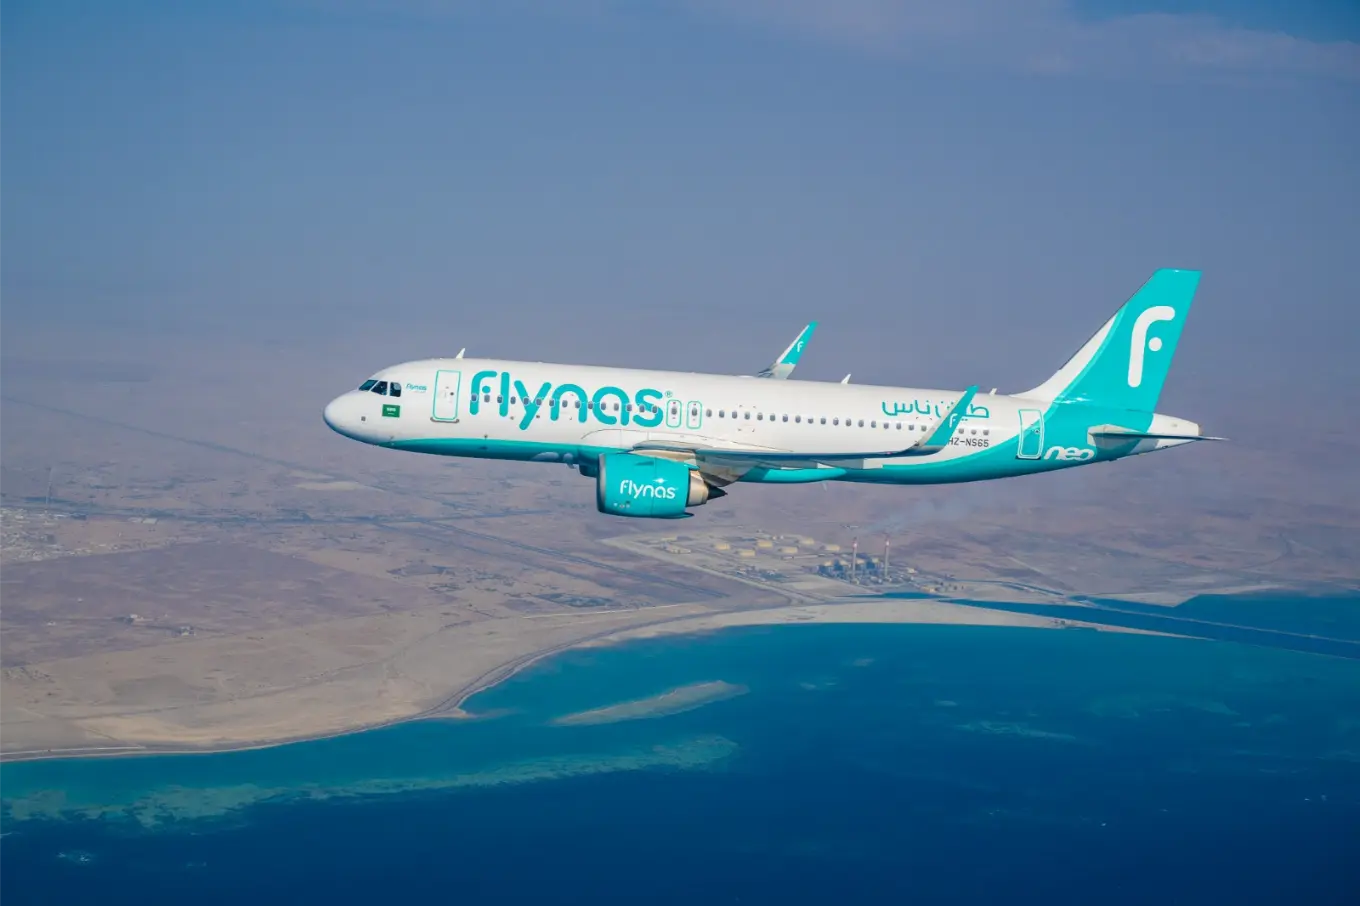 flynas (Airbus A320)